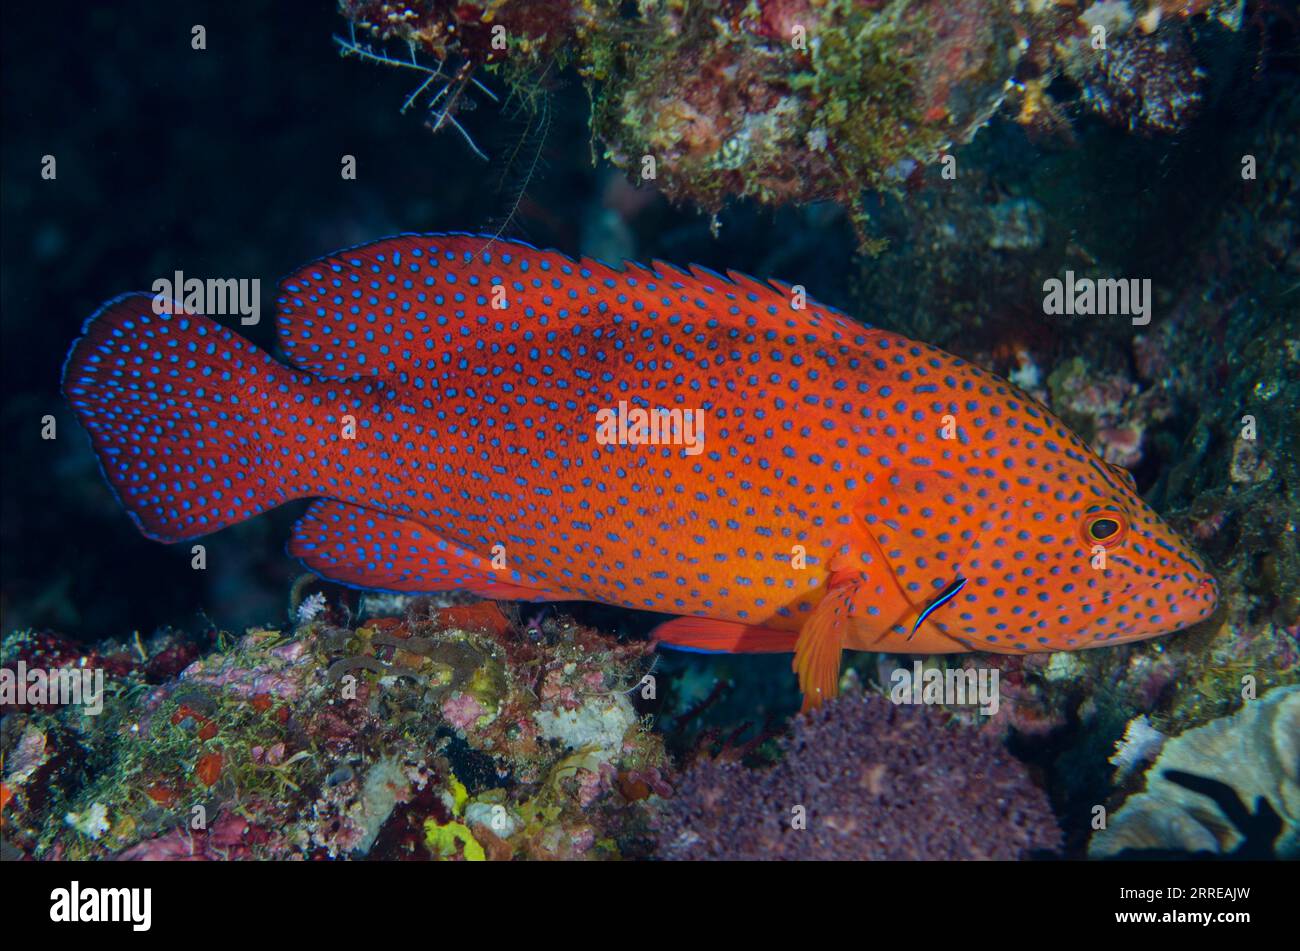 Red Coral Grouper, Cephalopholis miniata, being cleaned by juvenile Bluestreak Cleaner Wrasse, Labroides dimidiatus, Boo West dive site, Misool Island Stock Photo